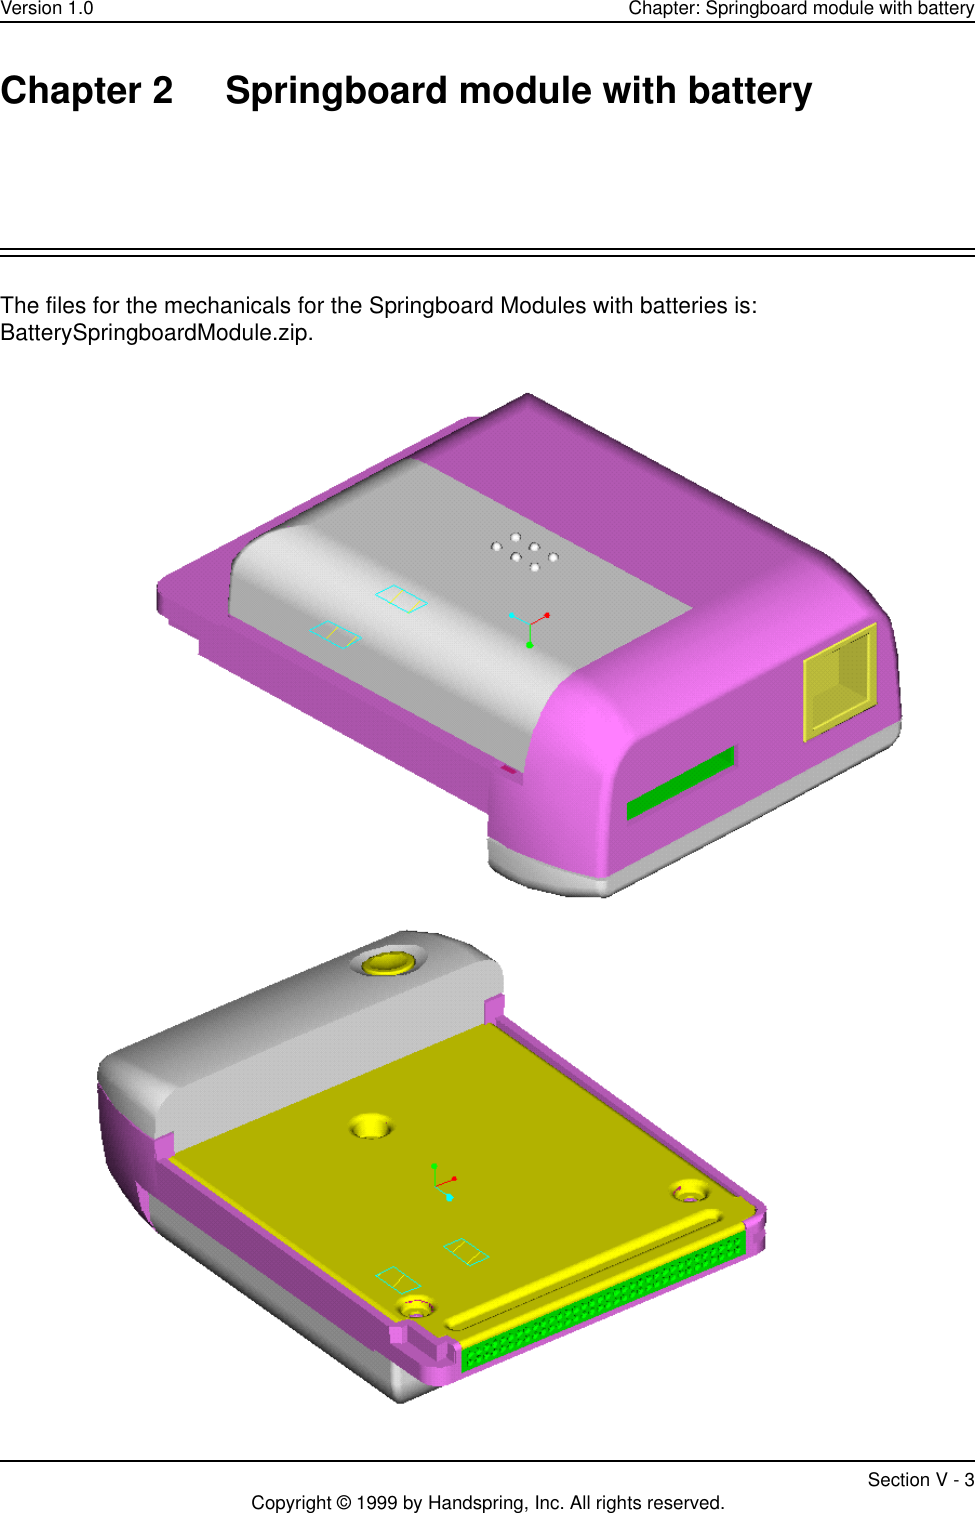 Version 1.0 Chapter: Springboard module with batterySection V - 3Copyright © 1999 by Handspring, Inc. All rights reserved.Chapter 2 Springboard module with batteryThe files for the mechanicals for the Springboard Modules with batteries is: BatterySpringboardModule.zip.